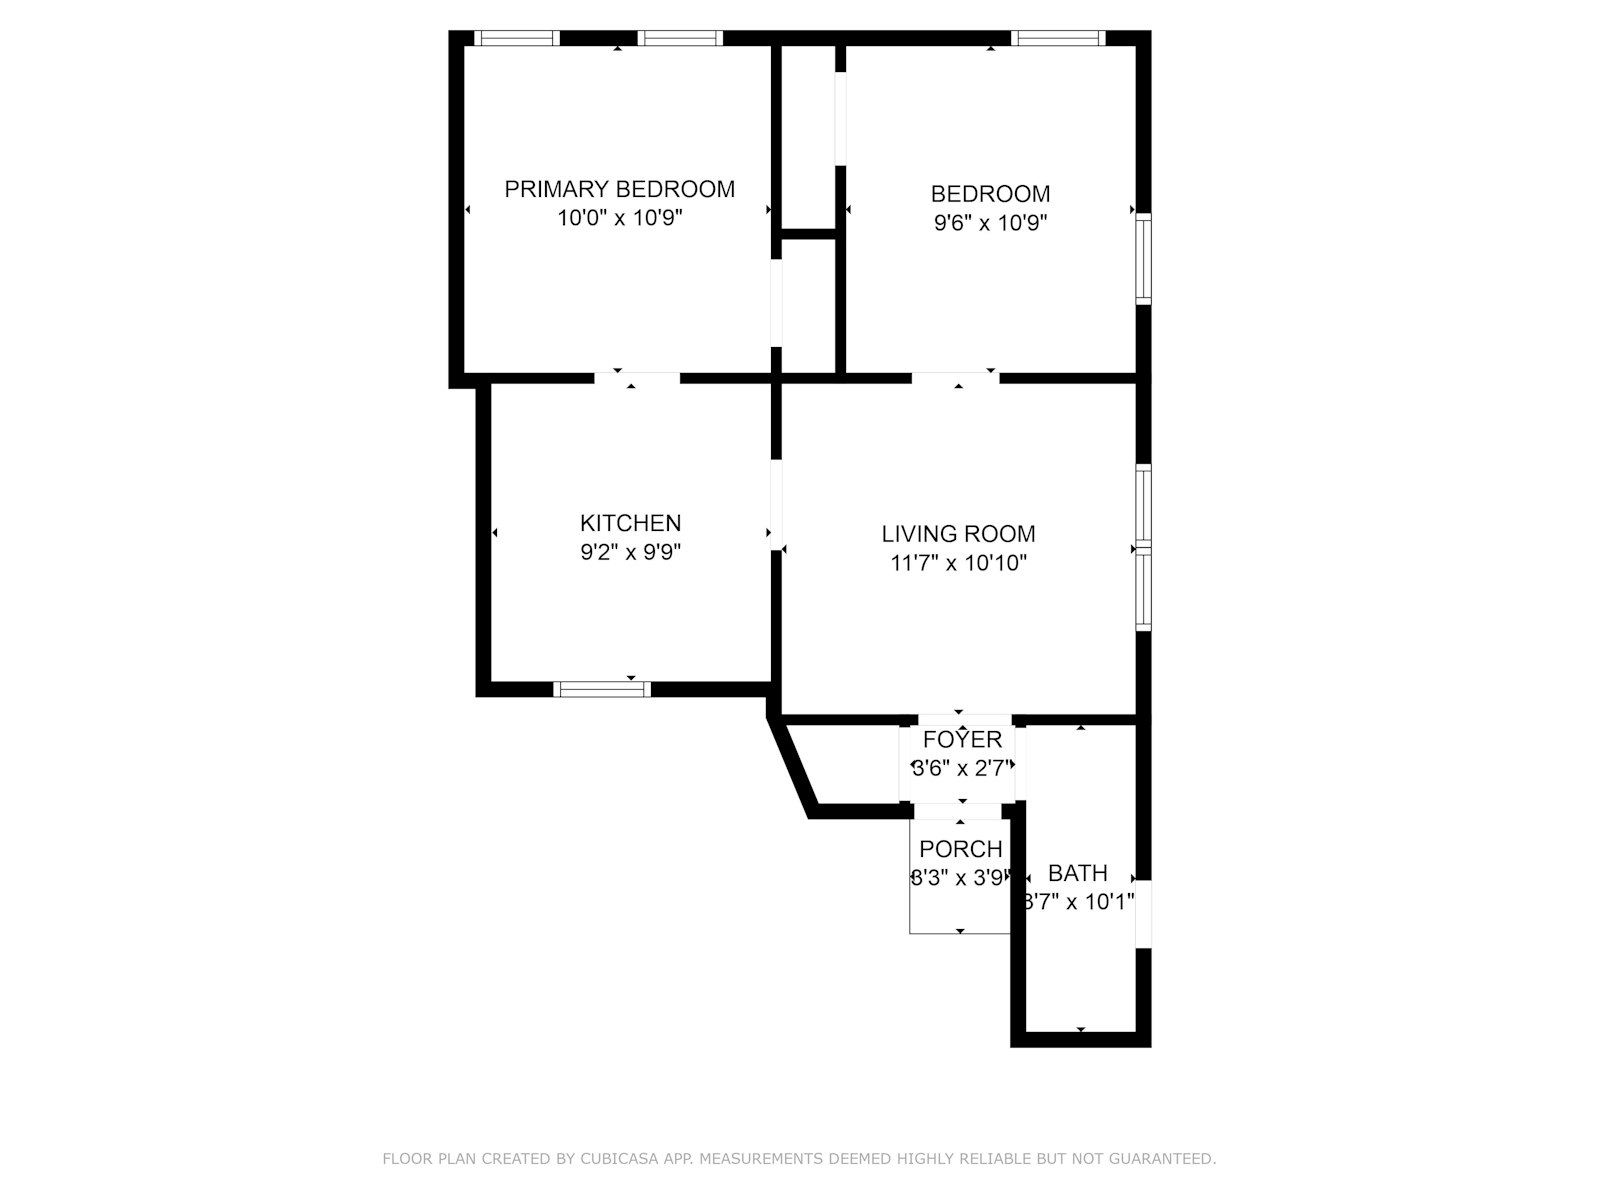 Floorplan for 3419 14th Ave, 1A